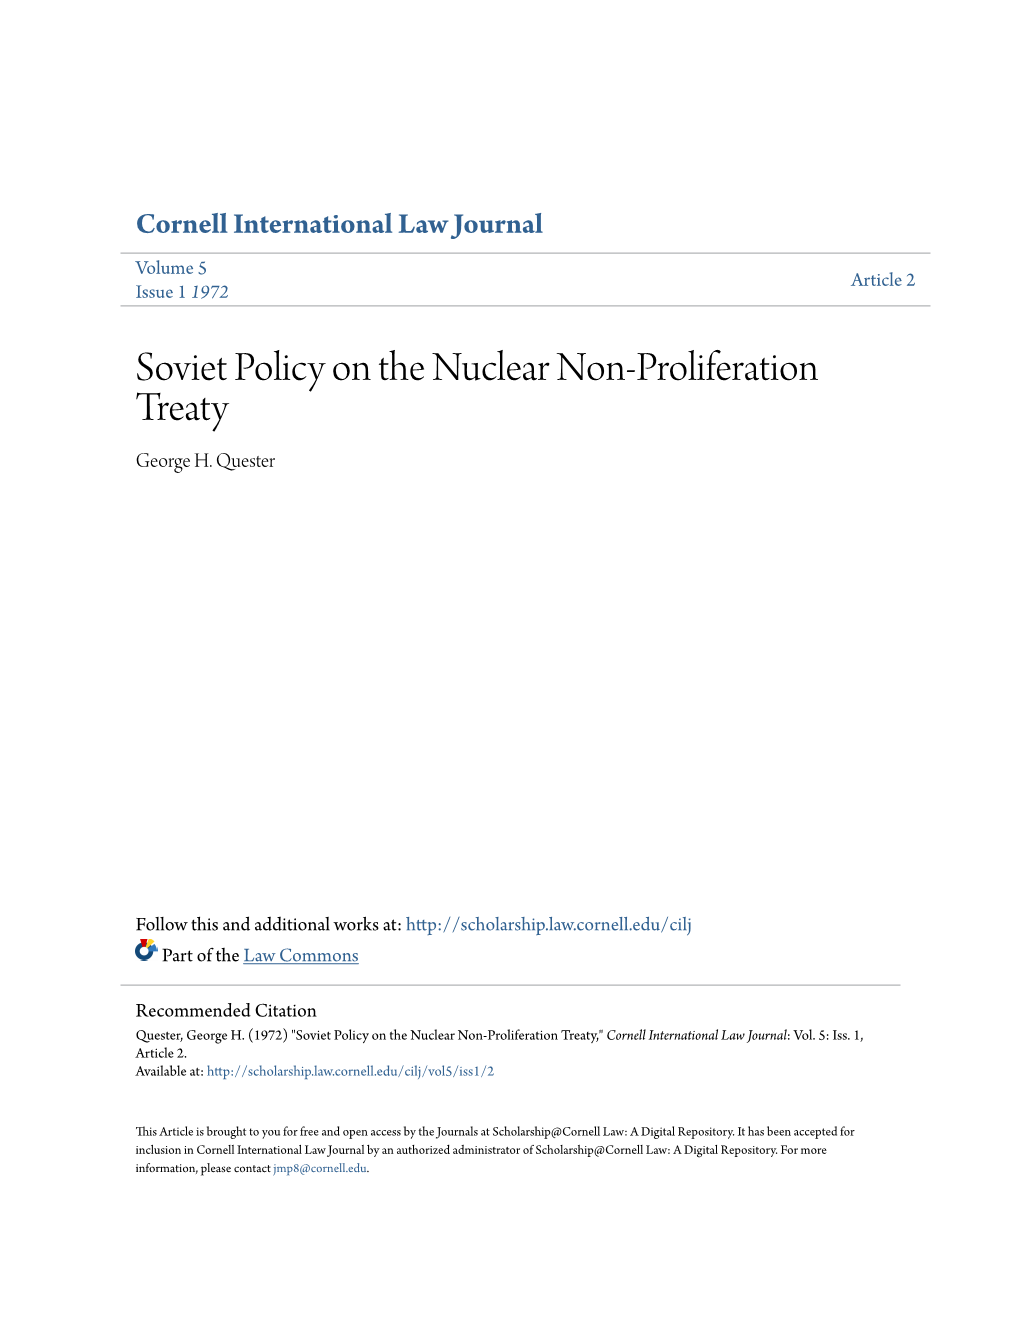 Soviet Policy on the Nuclear Non-Proliferation Treaty George H